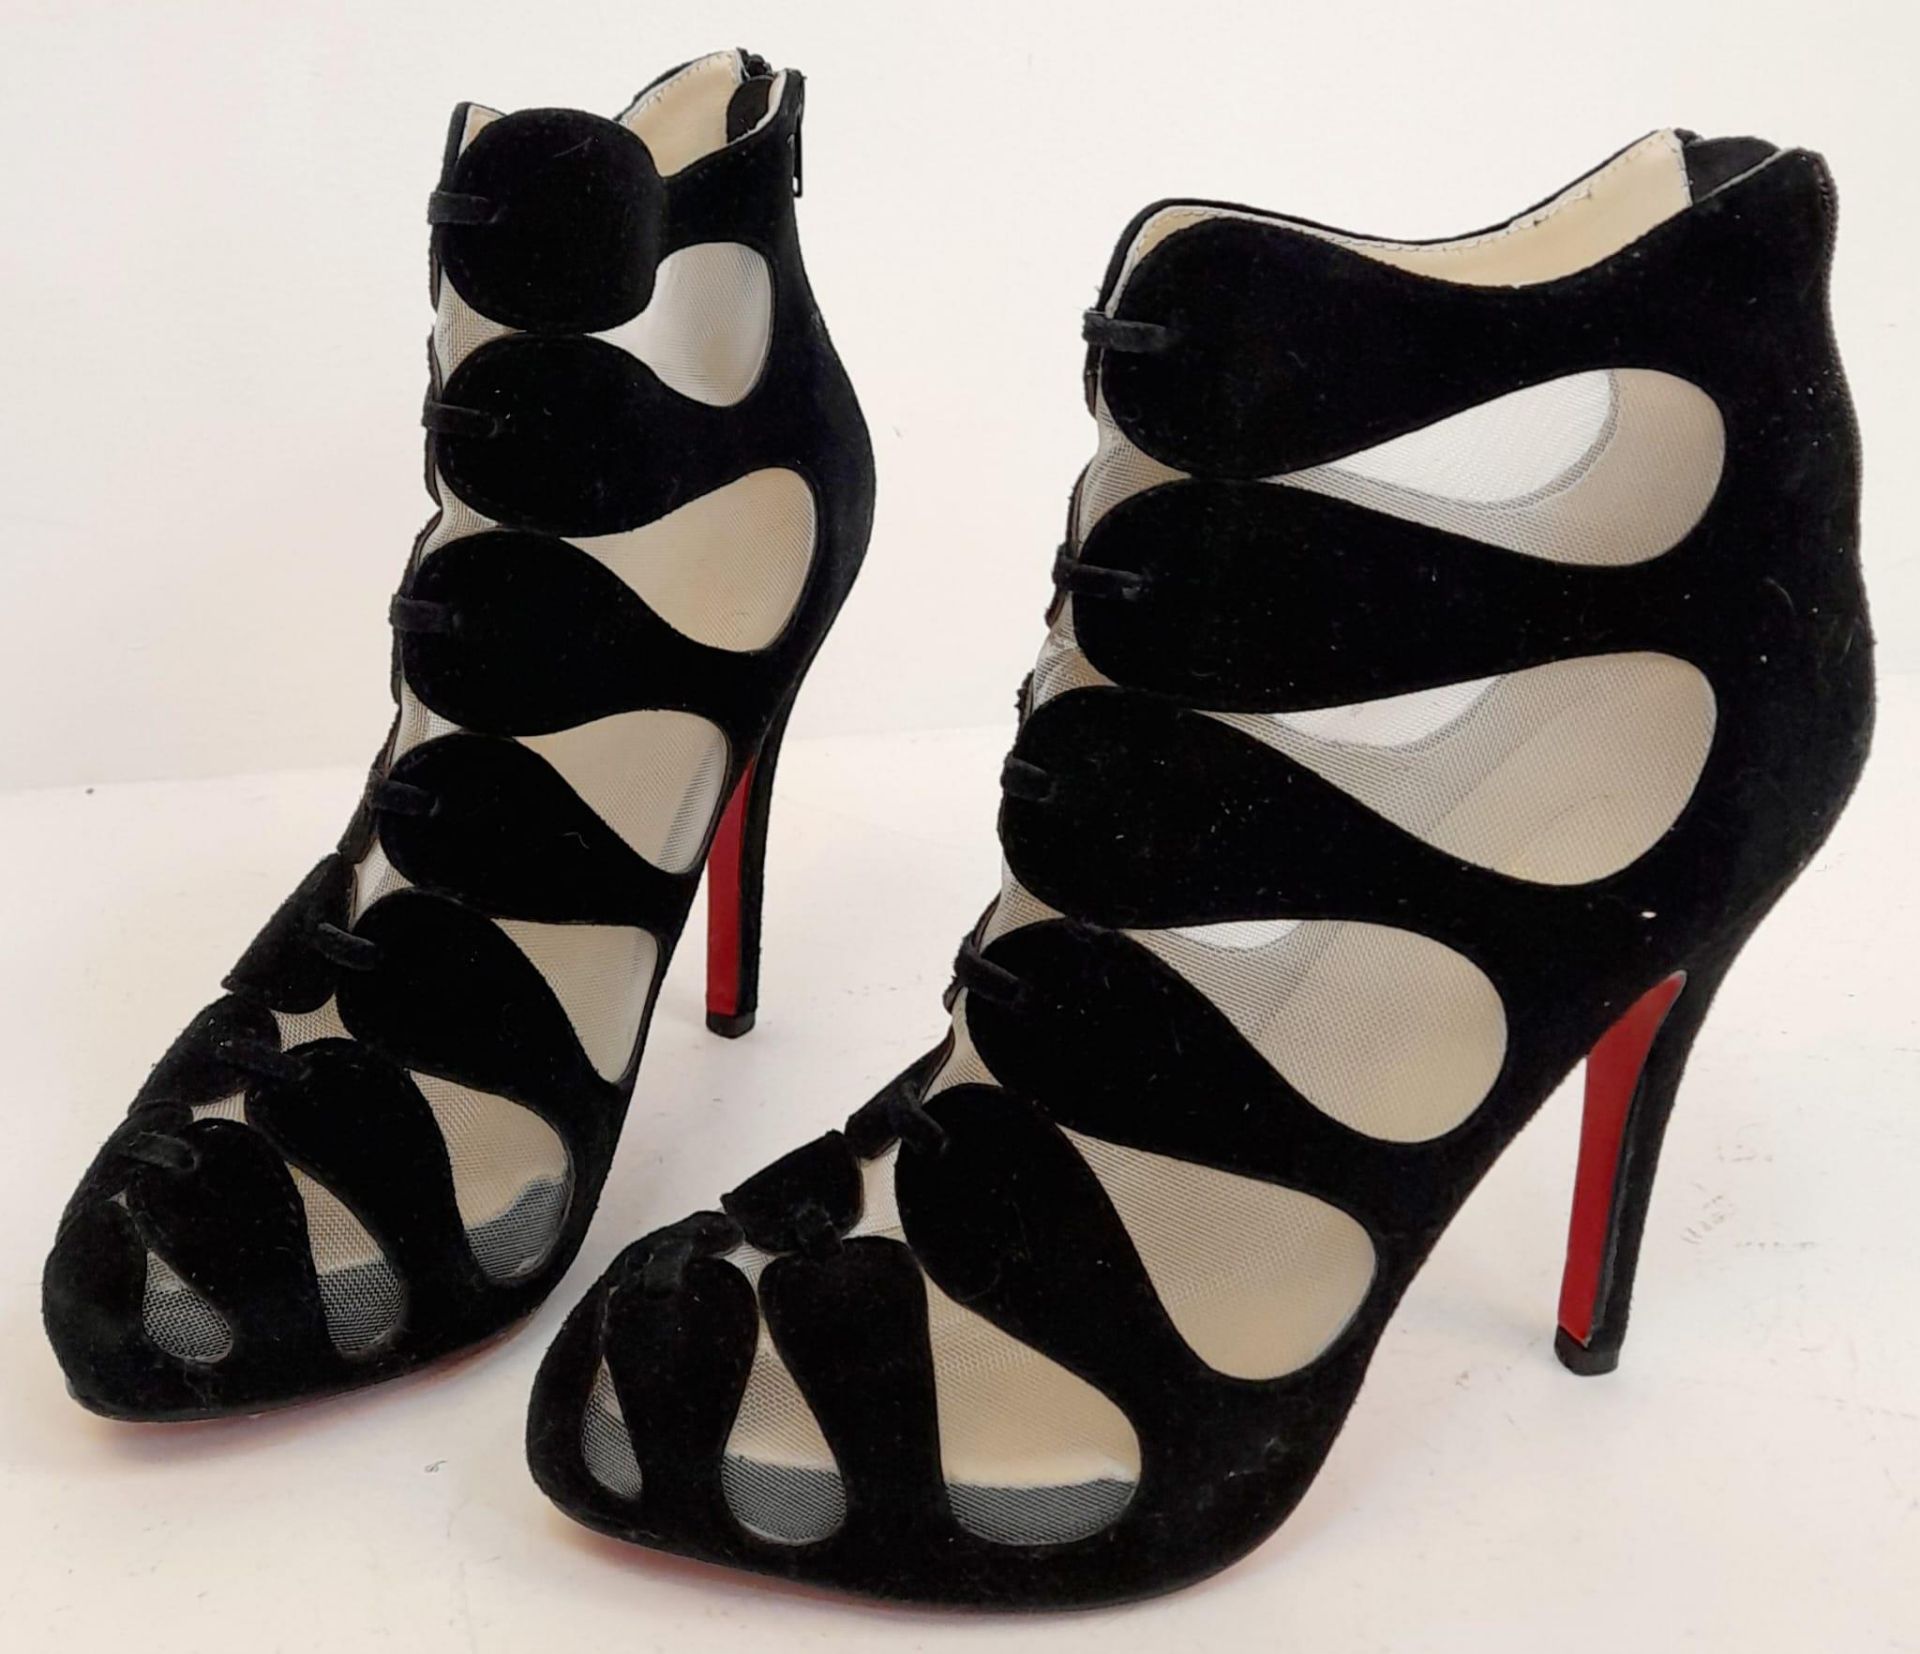 A pair of Louboutin high heels "see through" in black suede, lightly used. Size 40. - Image 6 of 6